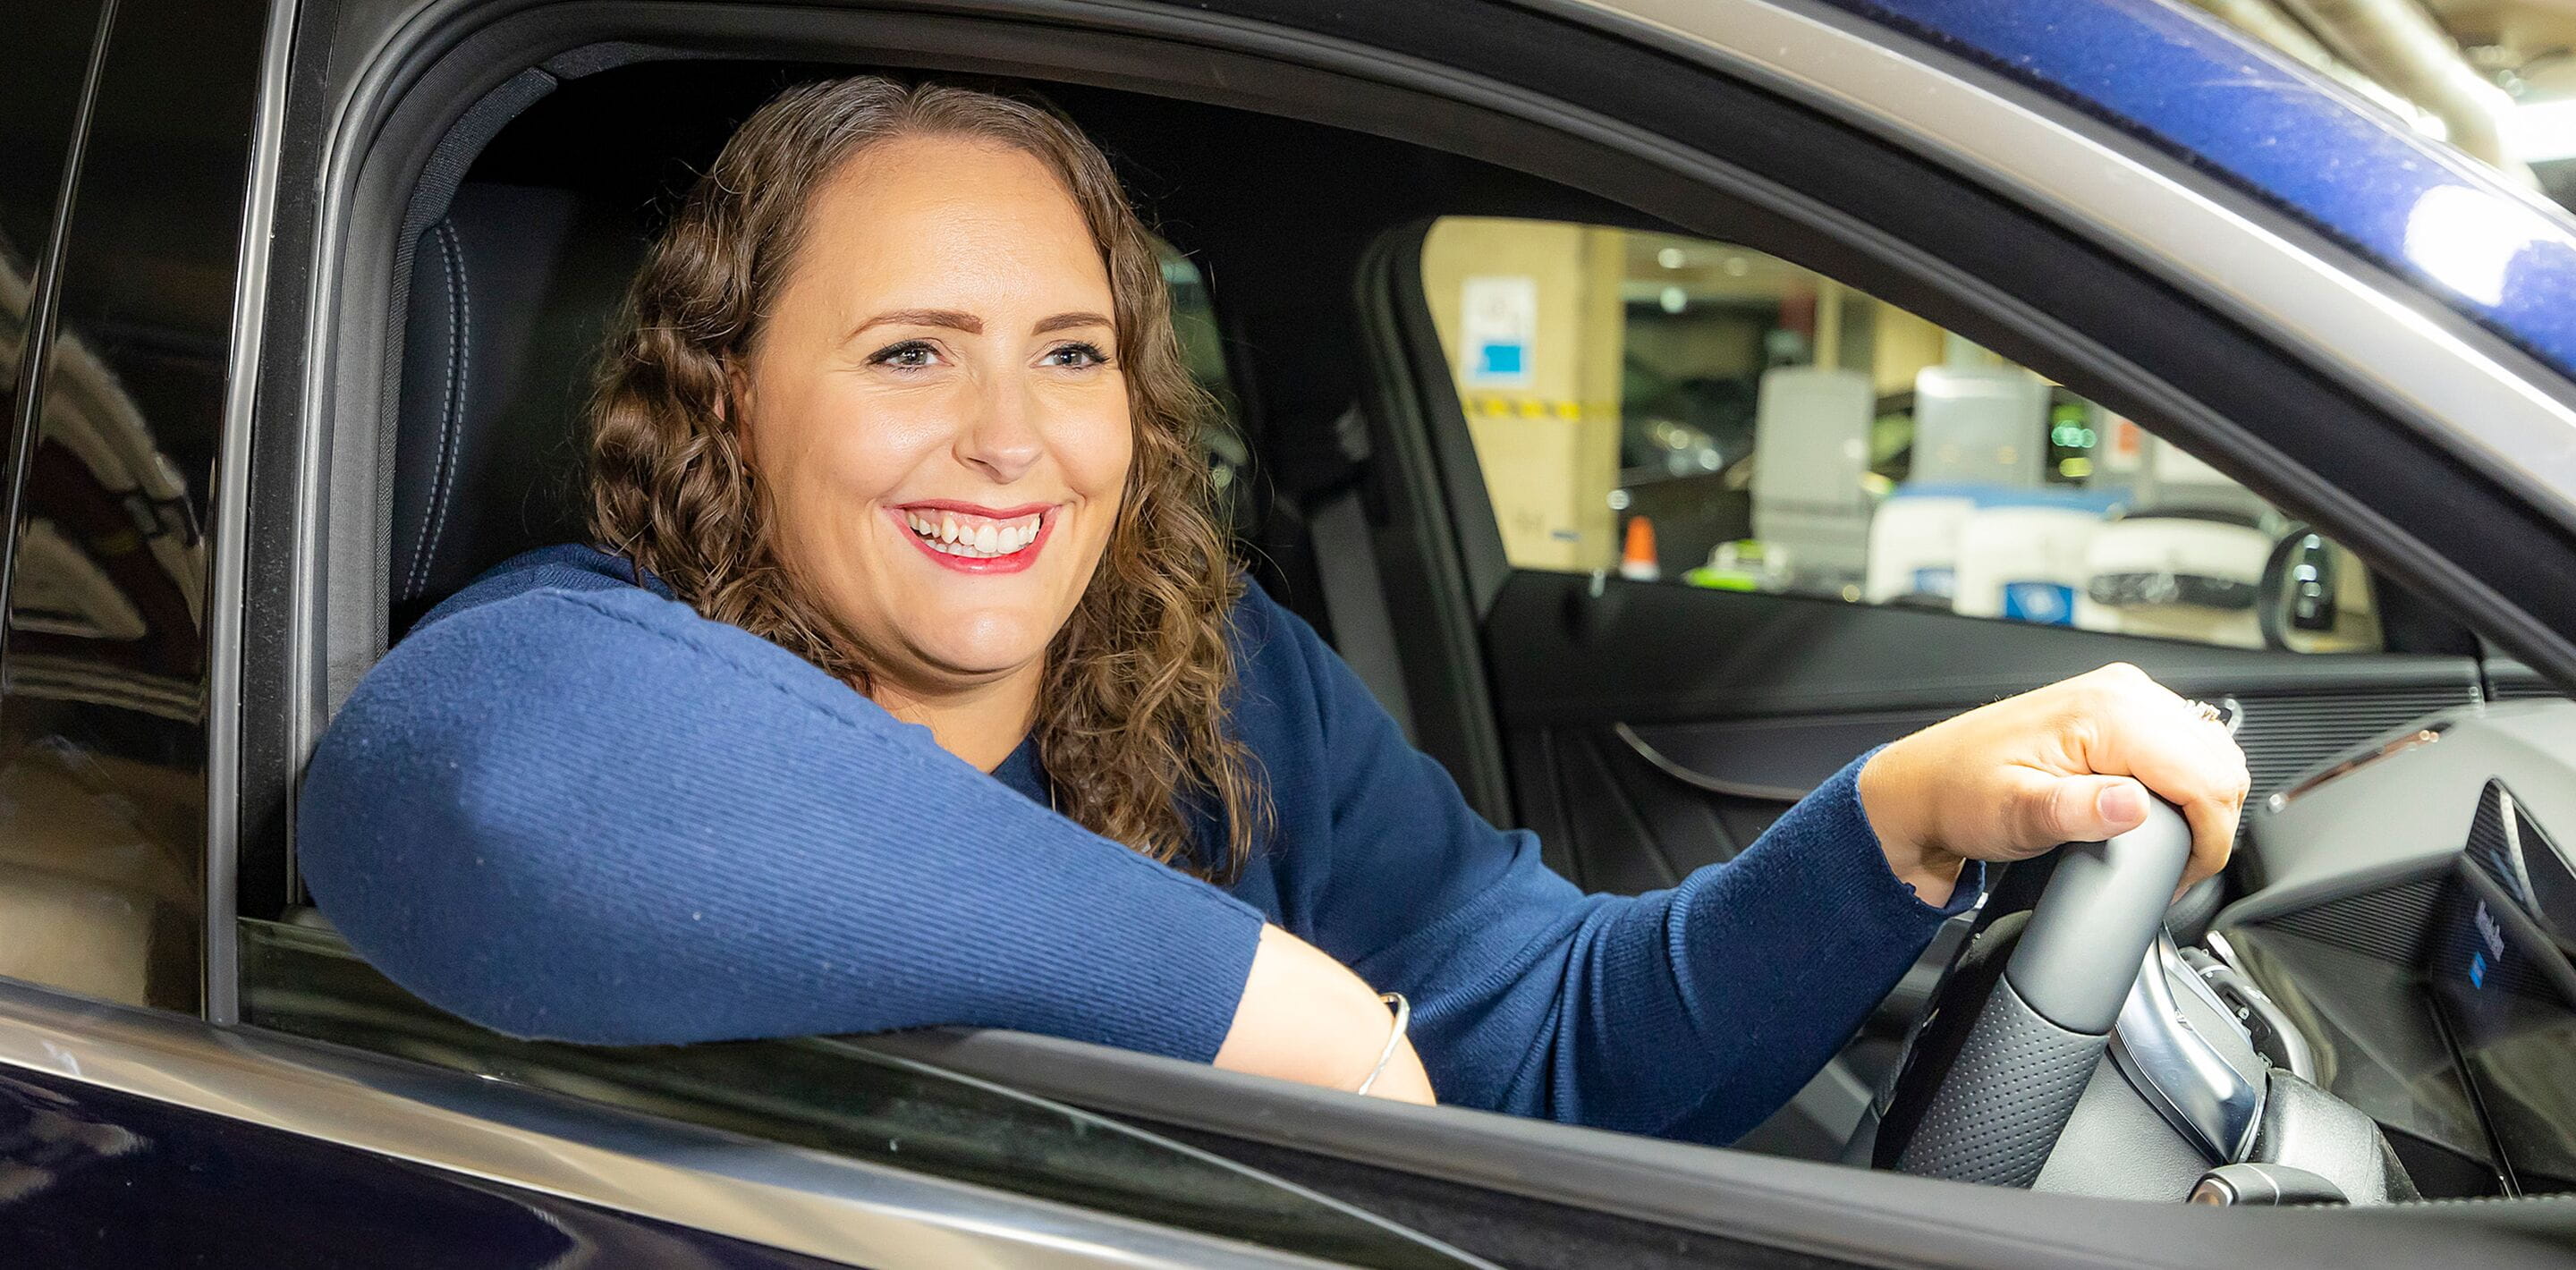 Woman in the car smiling